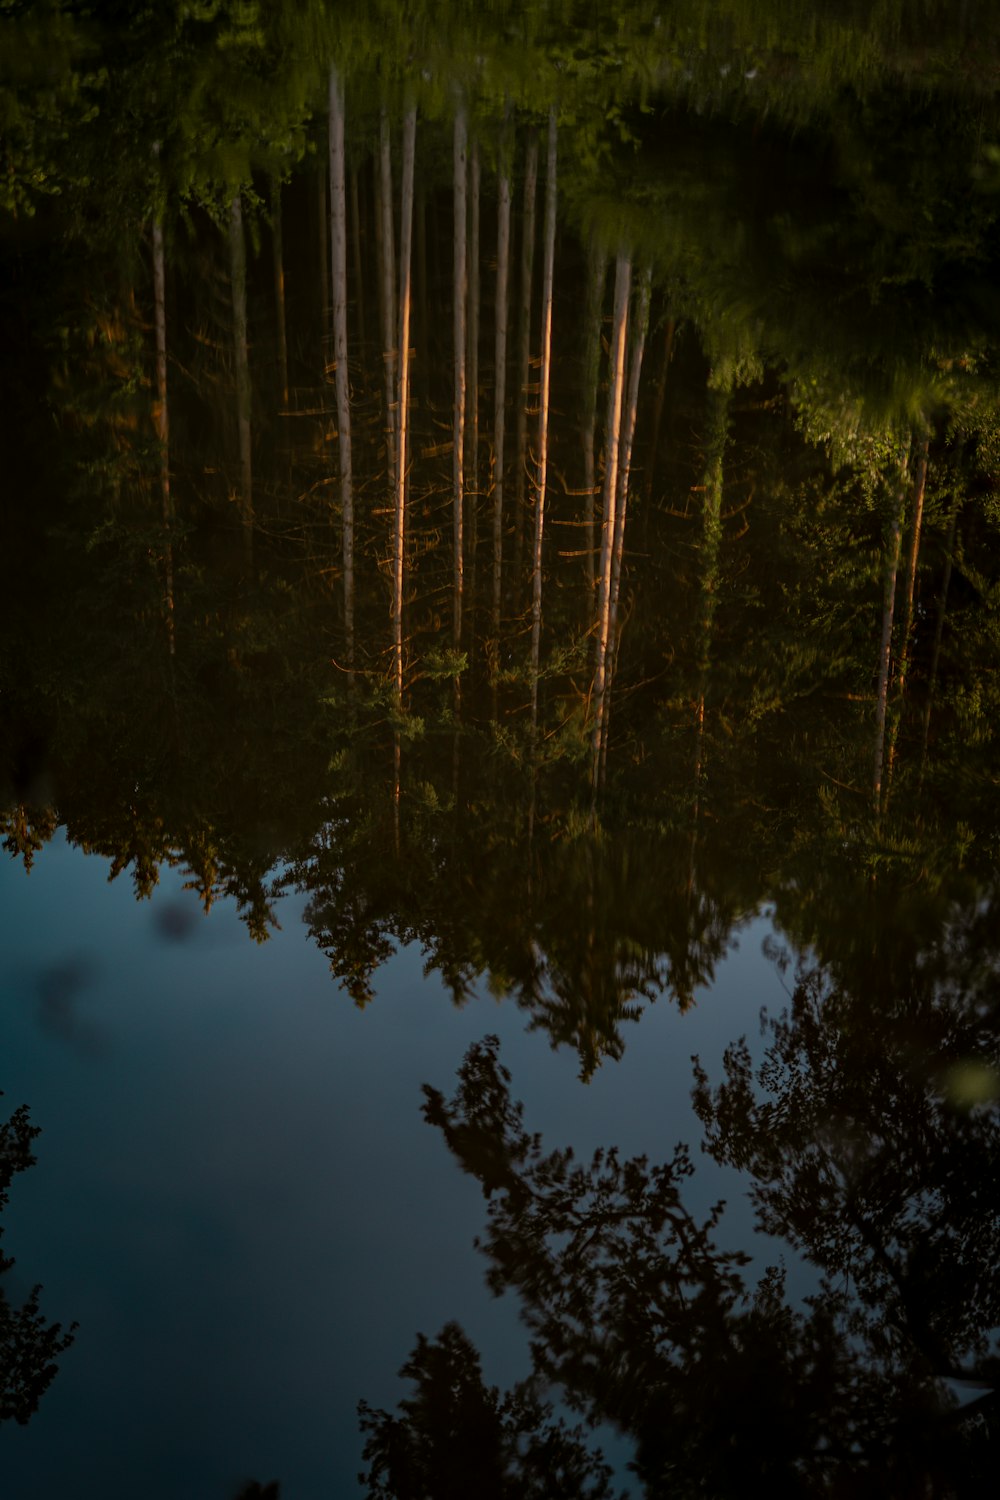 a group of trees reflected in a body of water